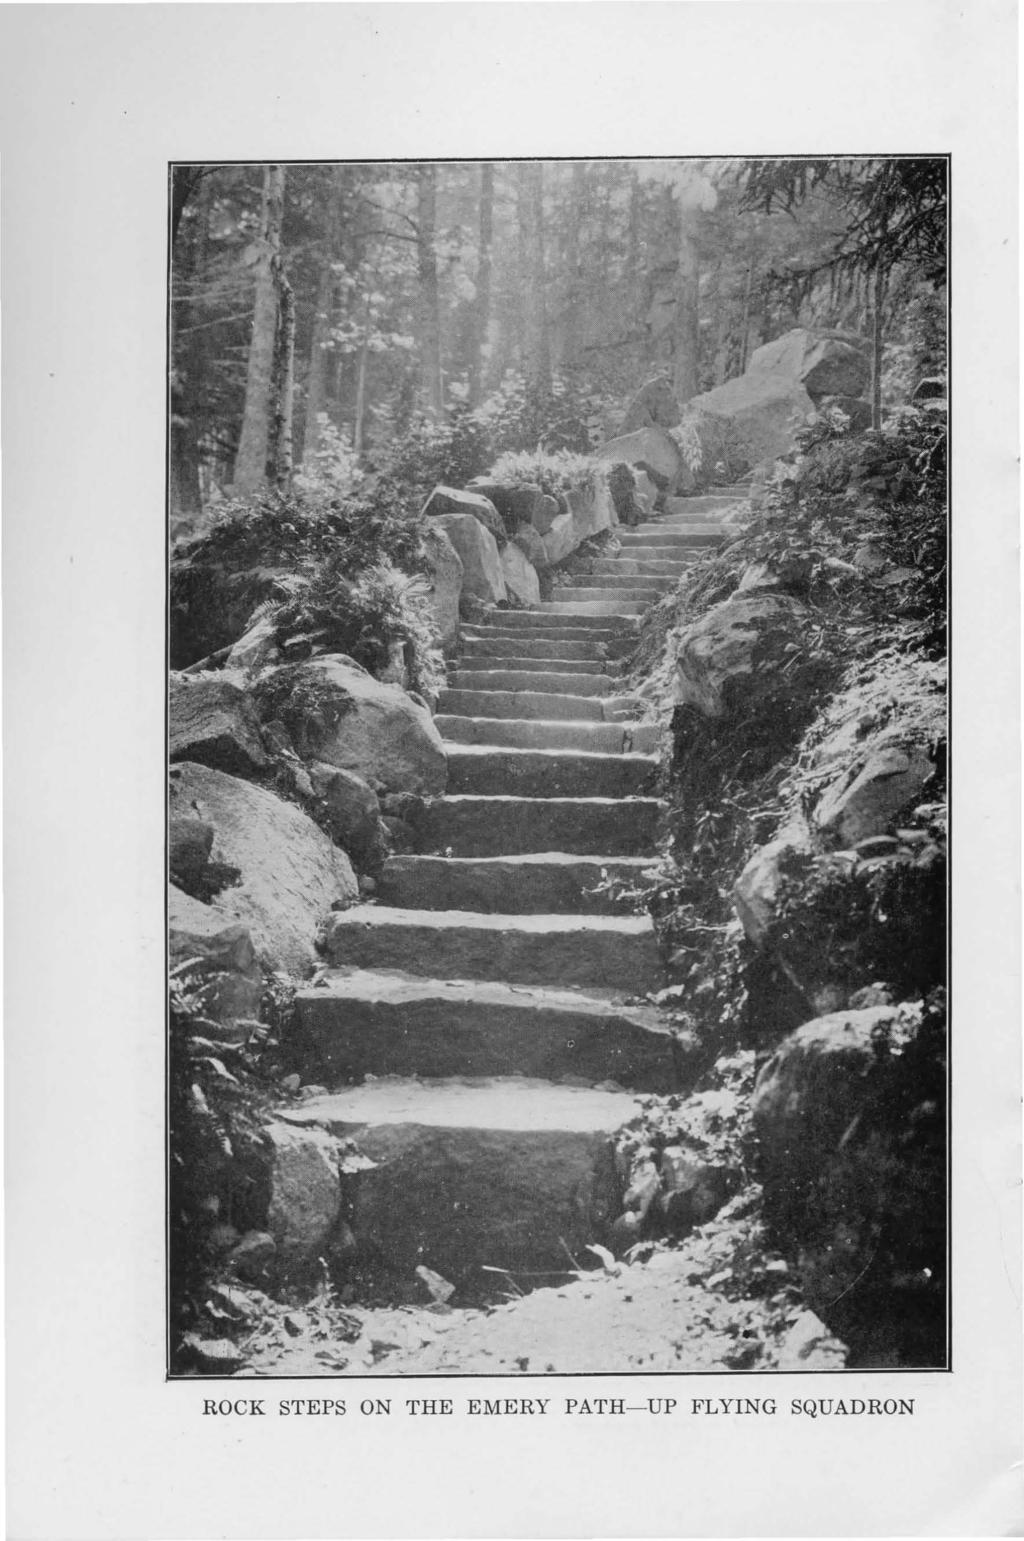 ROCK STEPS ON THE EMERY